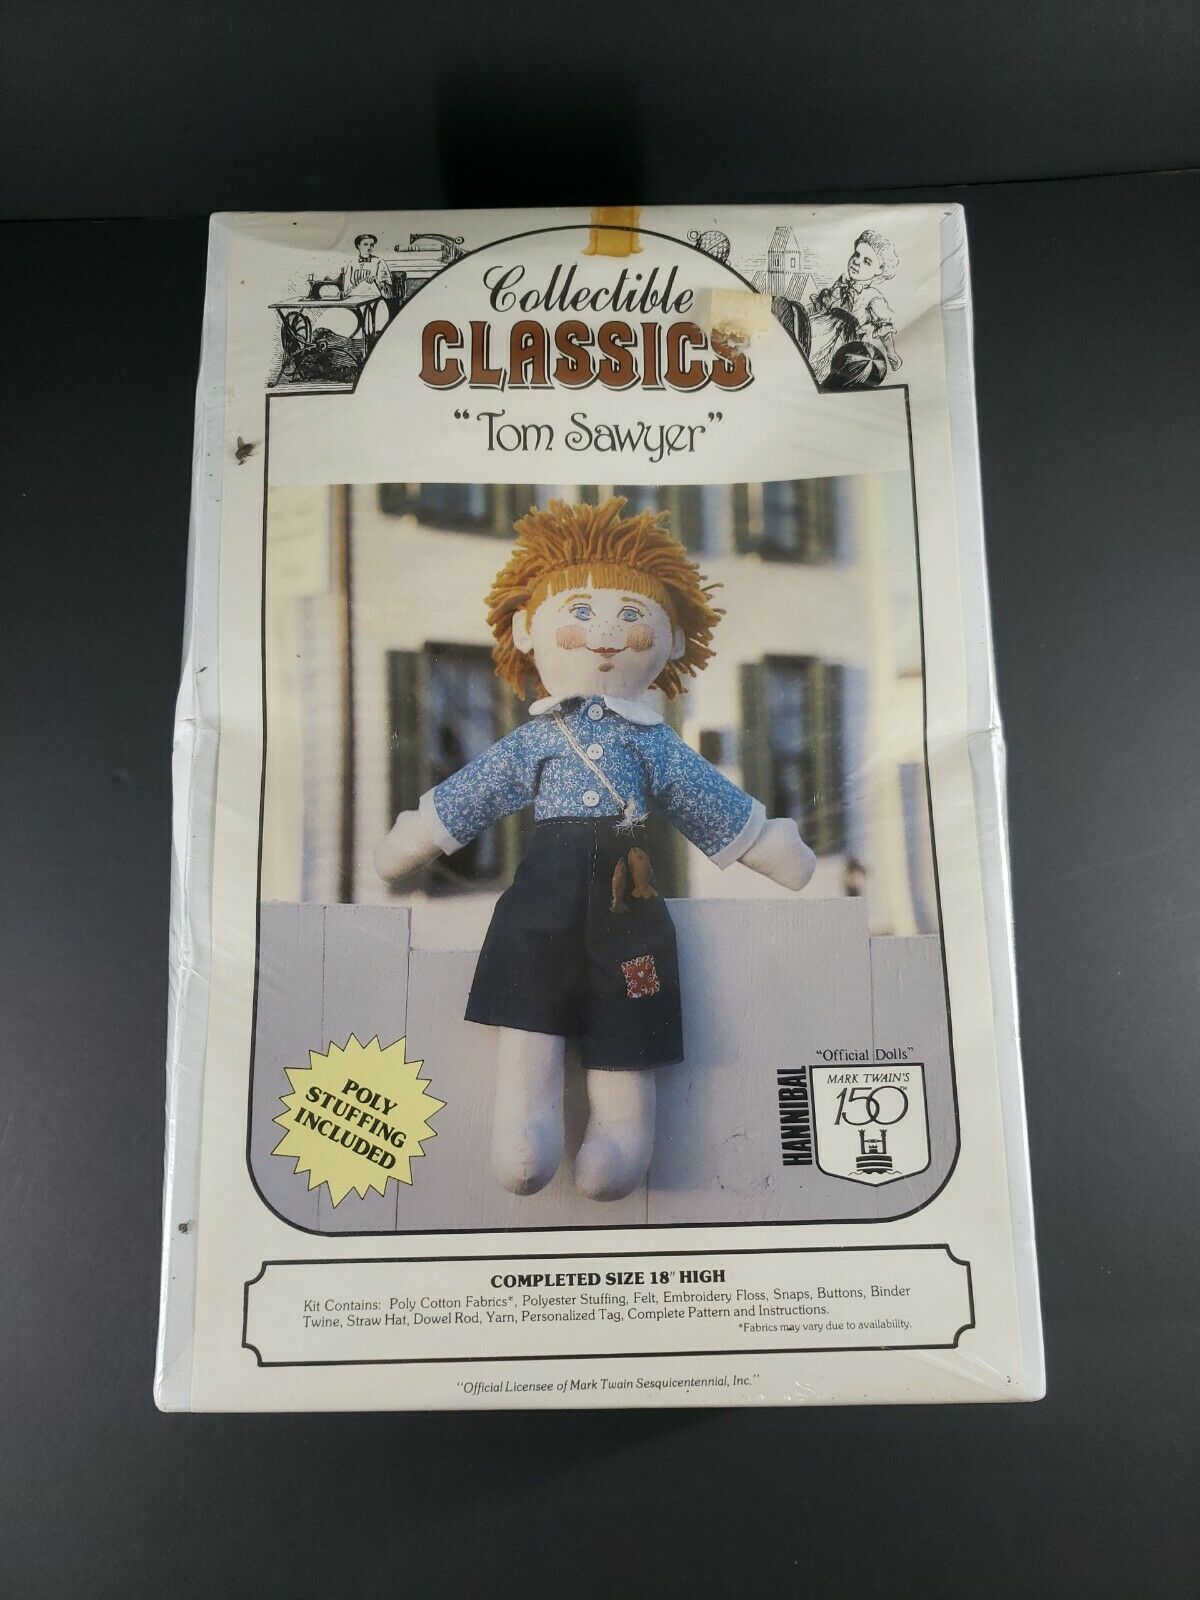 Doll Making Craft Kit Tom Sawyer Trends Collectible Classics Vtg But New Sealed